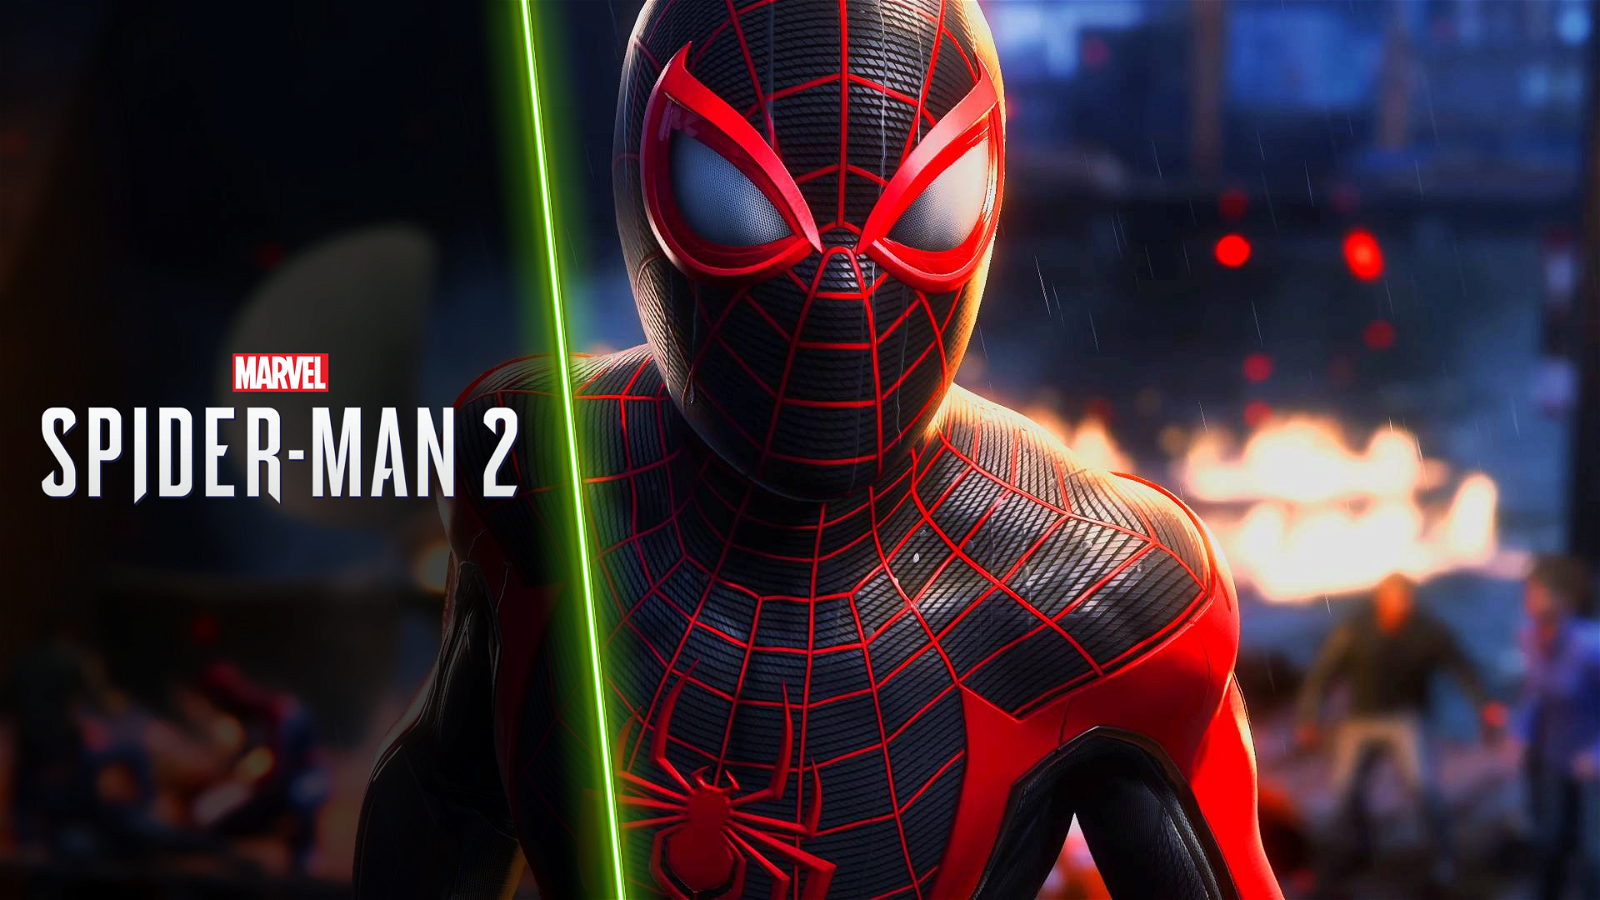 Marvel’s Spider-Man 2 Drops the Ball in a Pretty Major Way for Miles - Fix Incoming